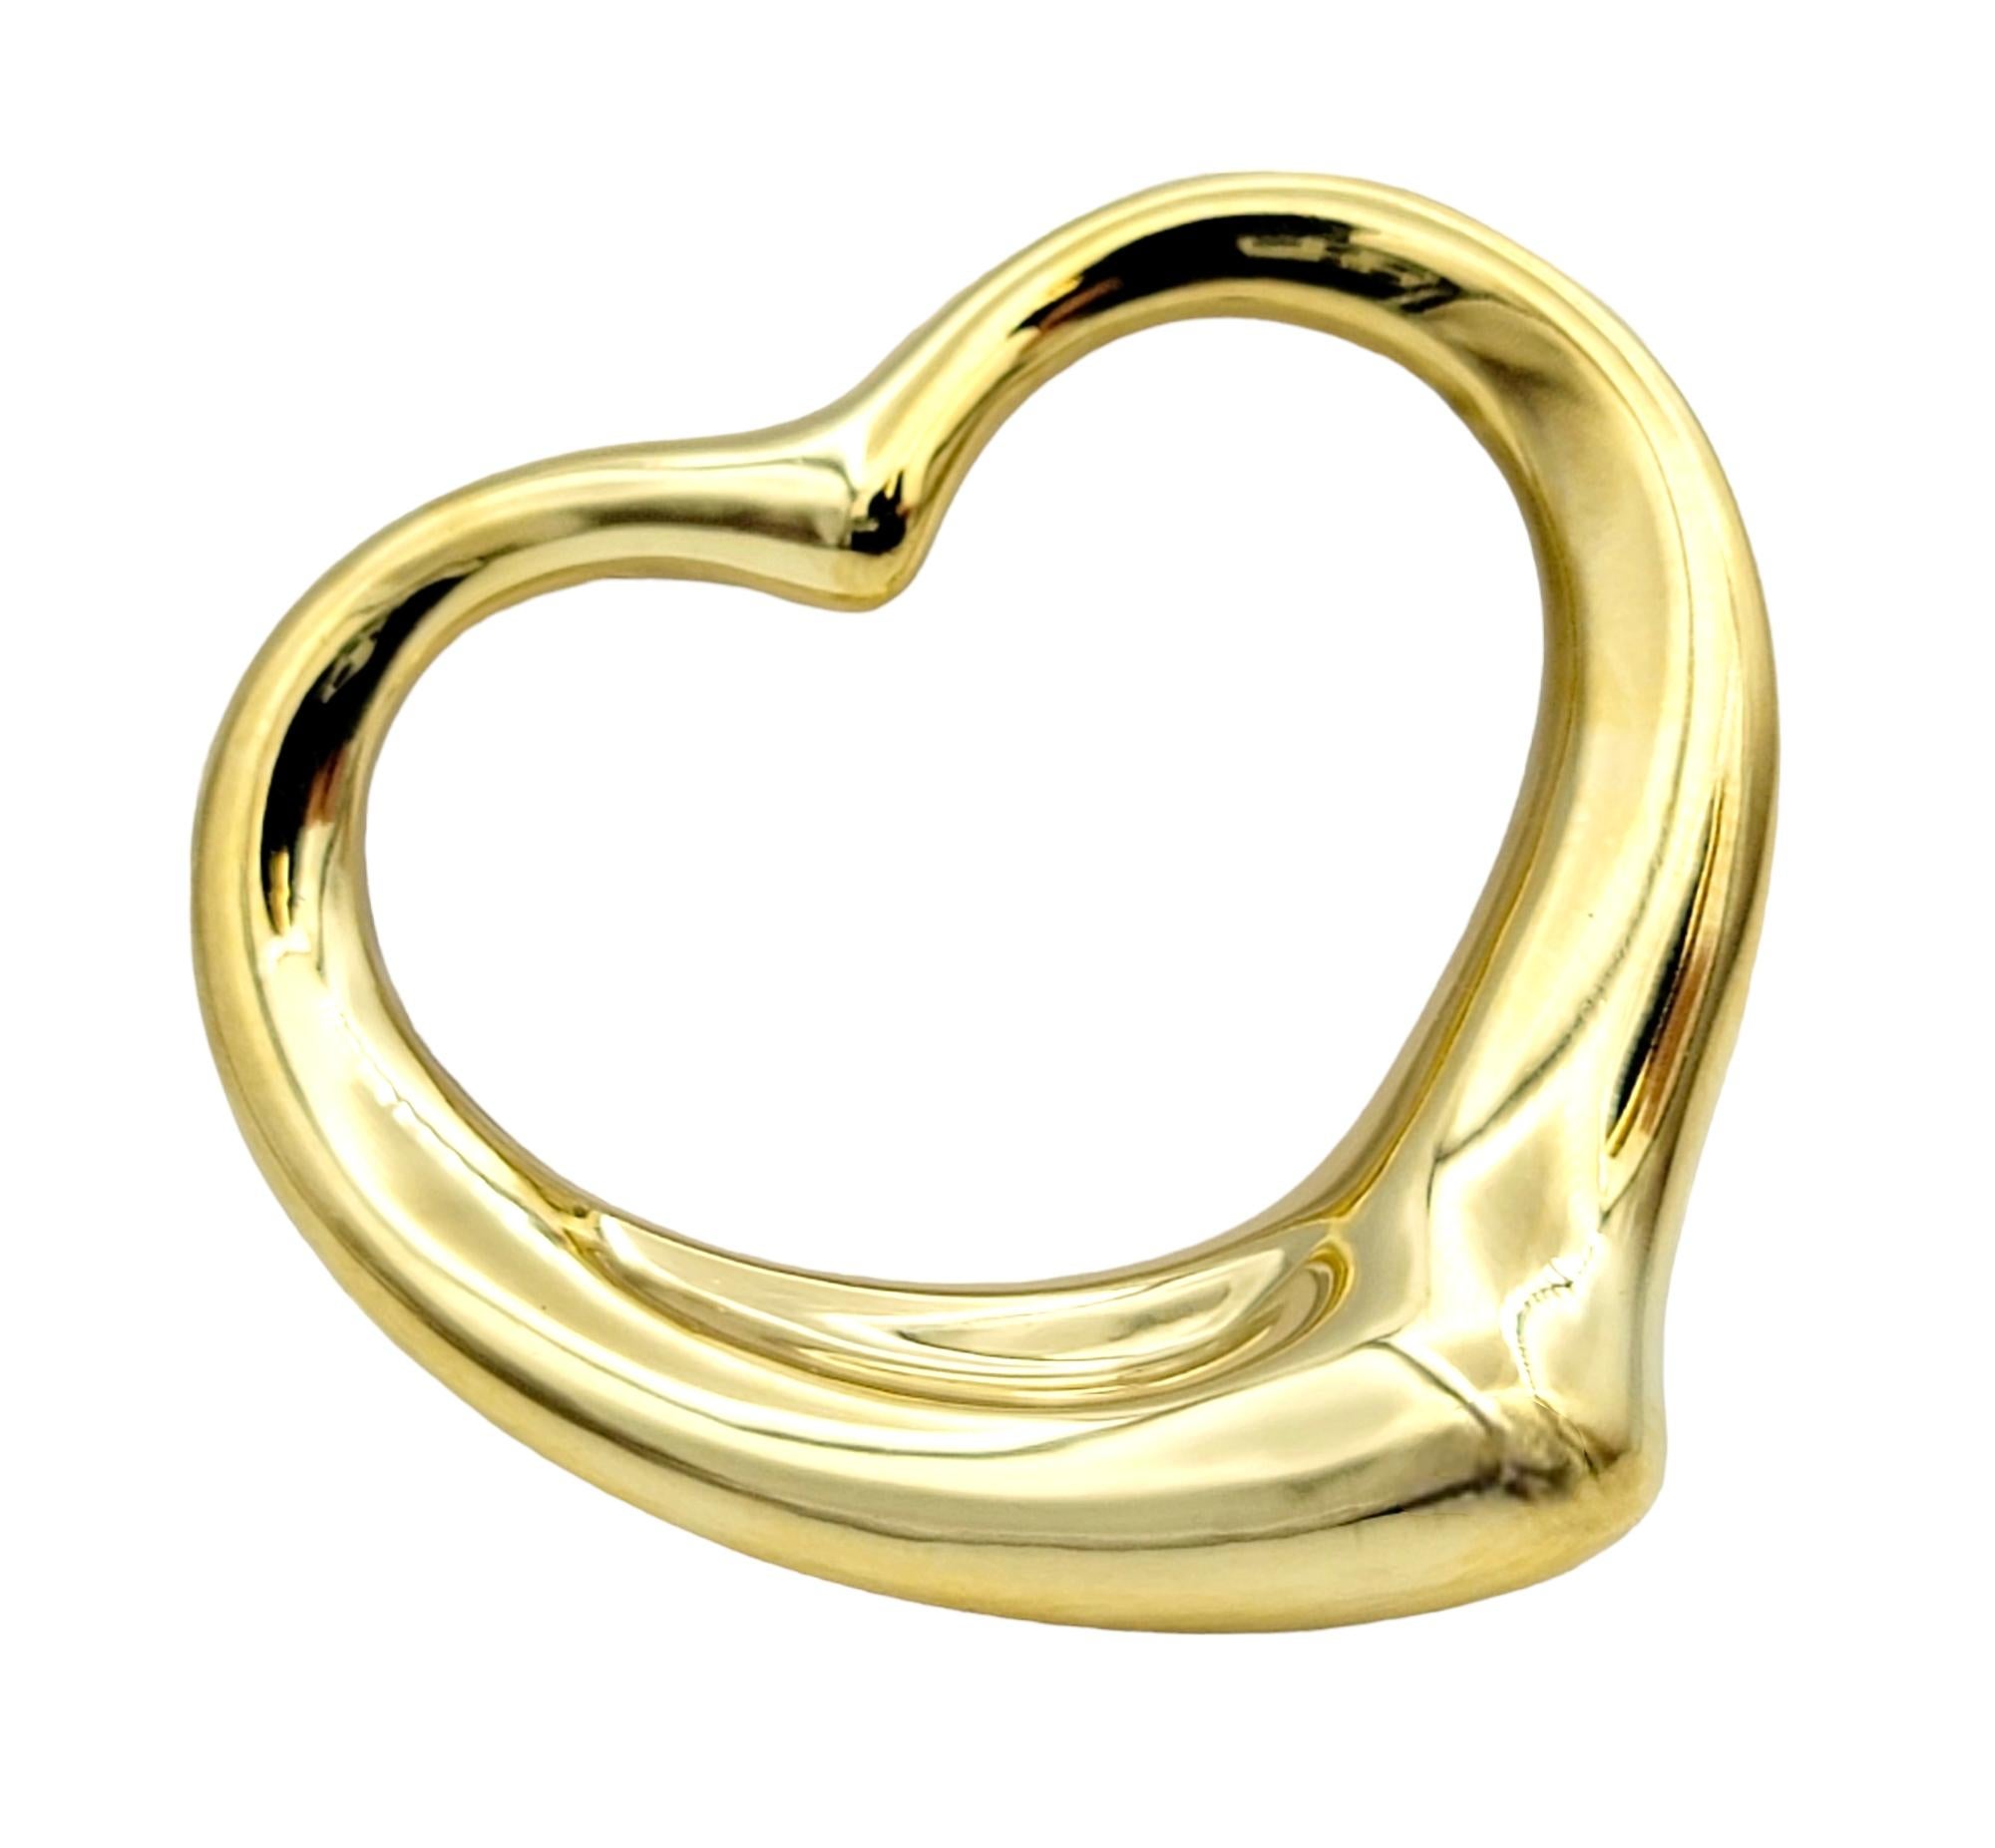 Gorgeous open heart pendant necklace by Elsa Peretti for Tiffany & Co. exudes minimalist elegance. The timeless design combined with the warm yellow gold setting makes for a piece that you will admire for years to come. 

This beautiful iconic